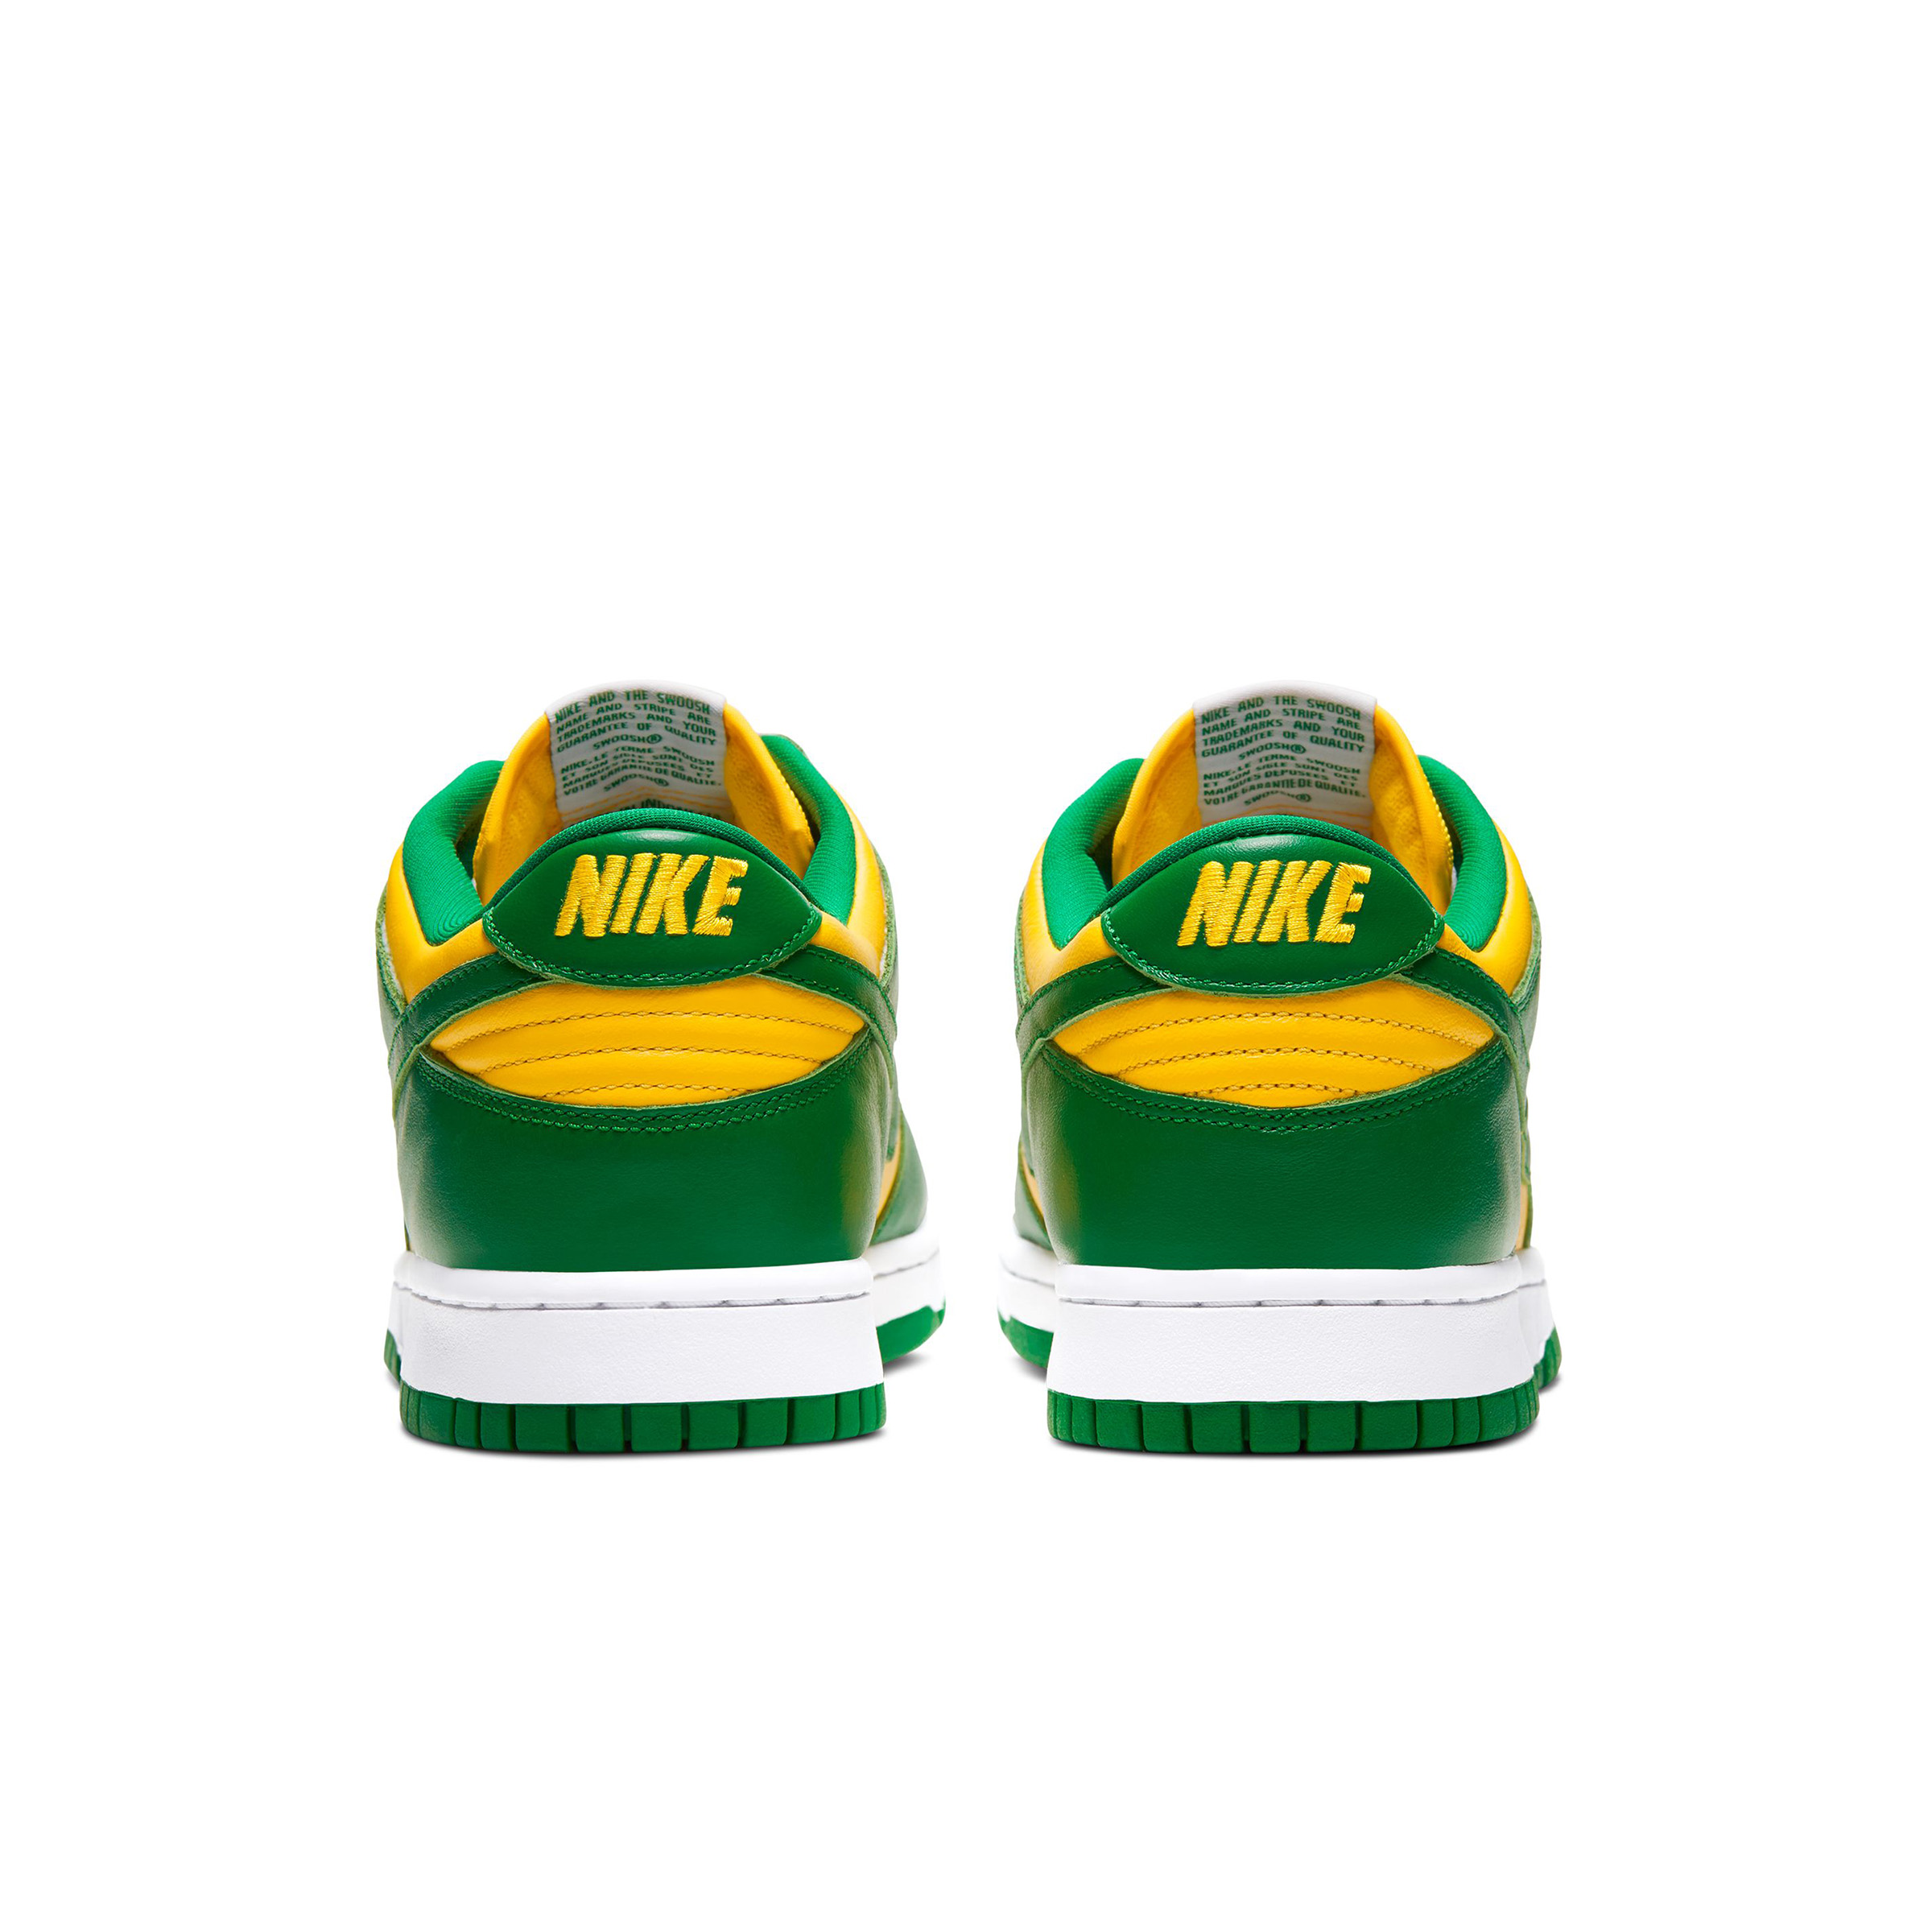 Nike Dunk Low SP 'Pine Green and Varsity Maize'